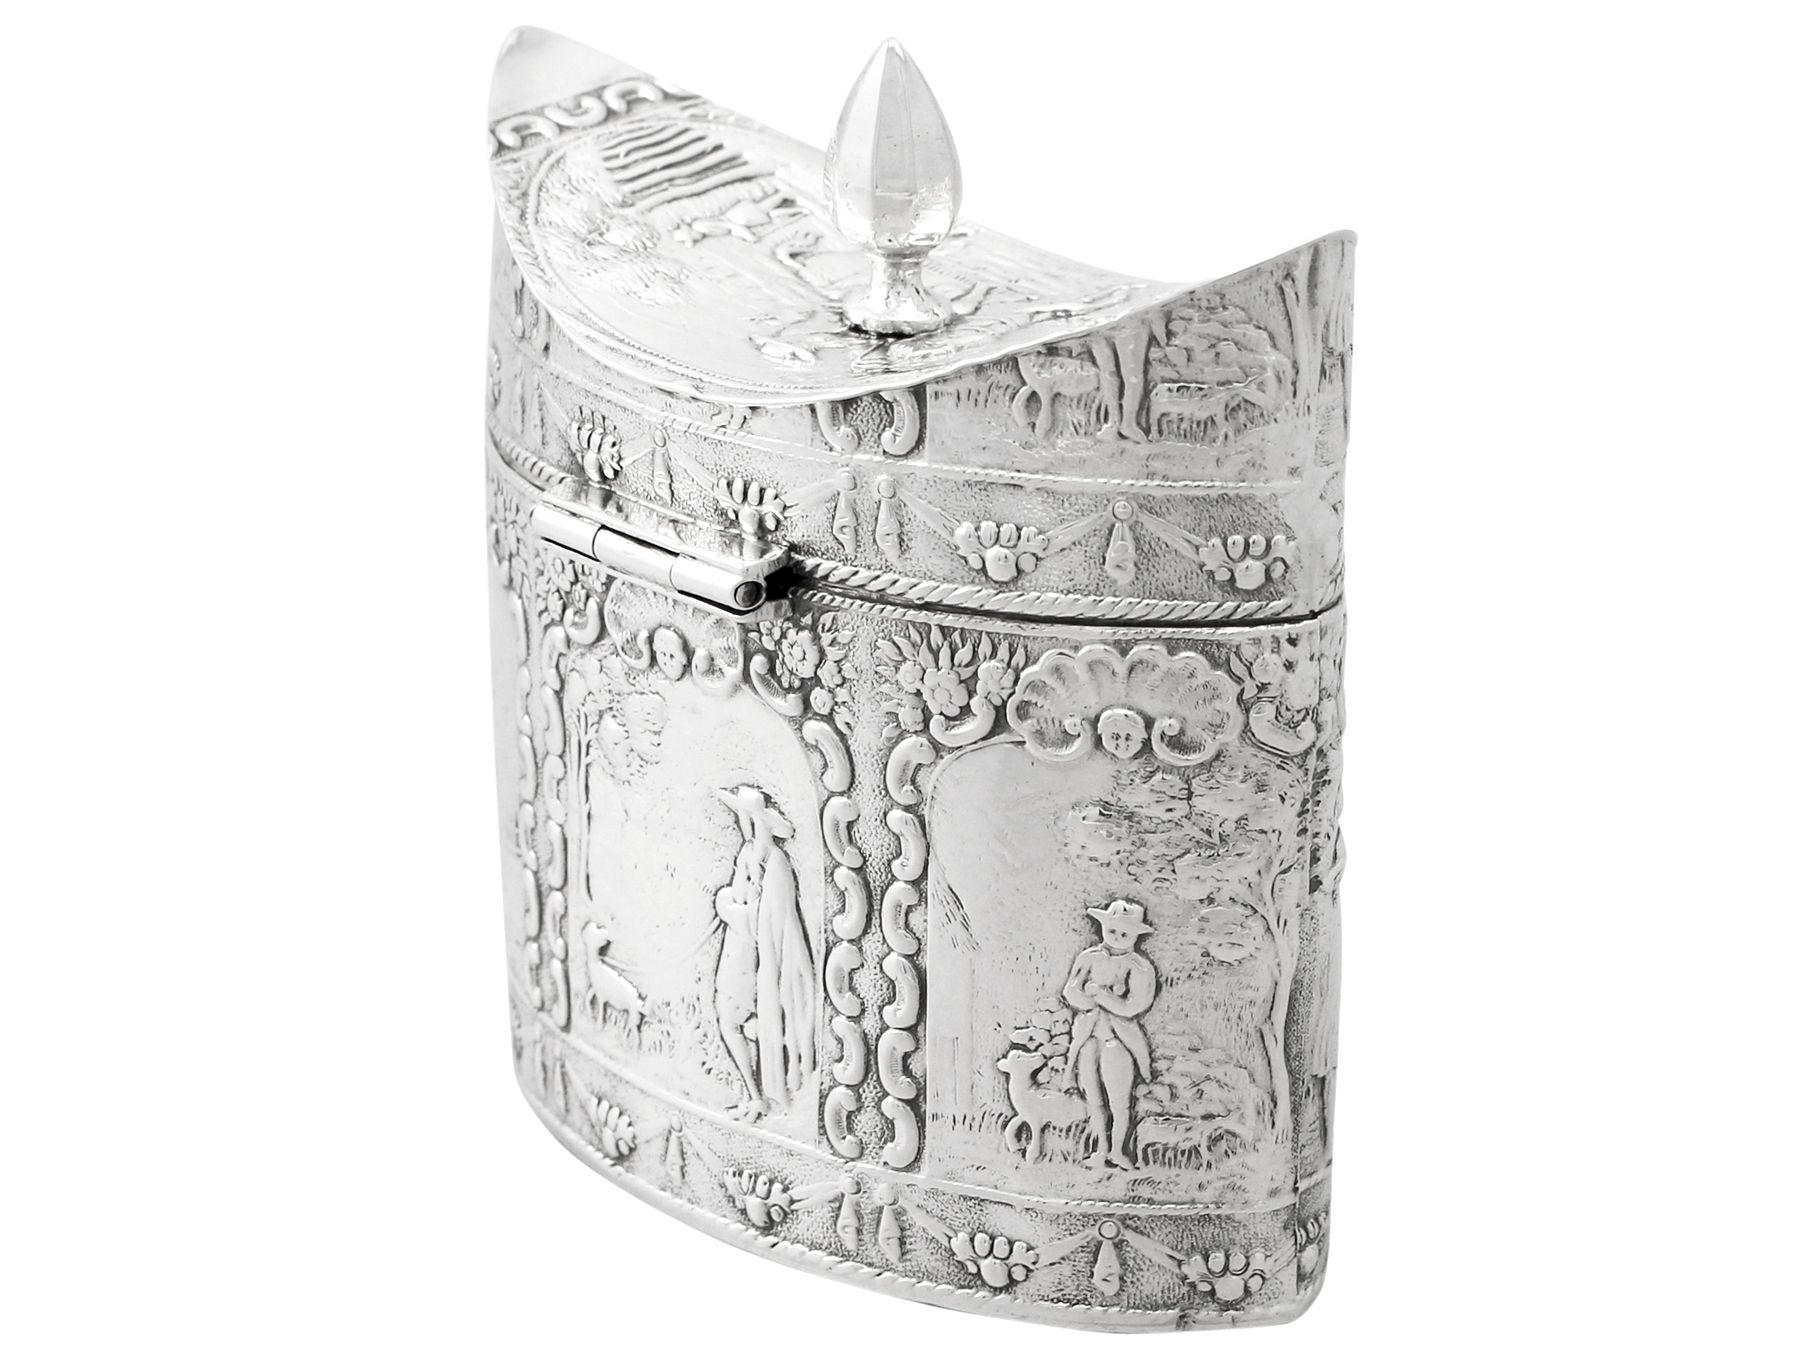 A fine antique Dutch silver tea caddy; an addition to our silver teaware collection.

This fine Dutch silver tea caddy has a navette shaped oval form.

The surface of this antique silver tea caddy is embellished with embossed panels depicting